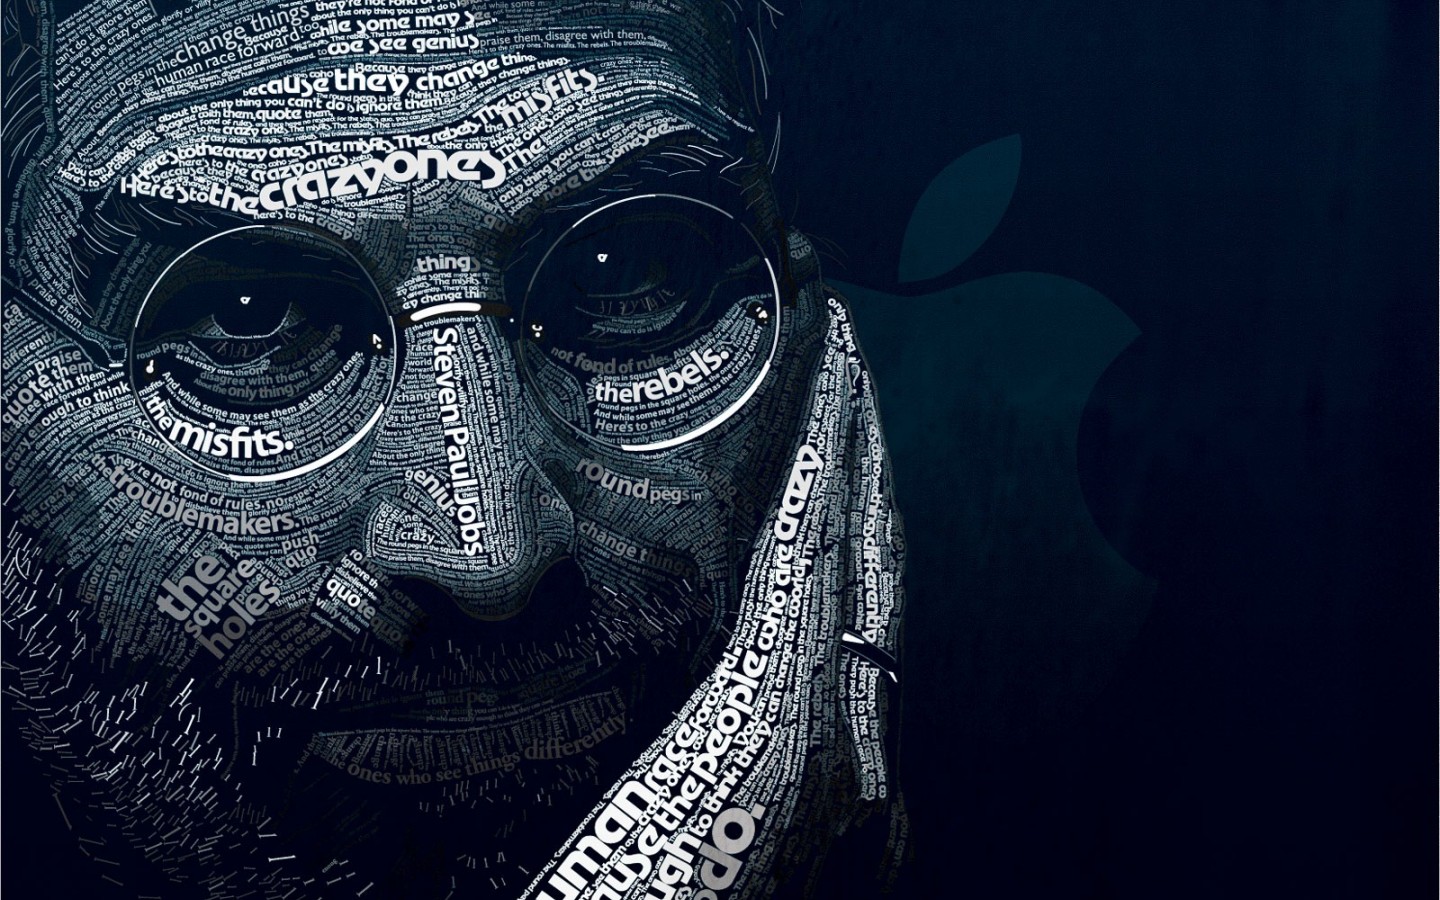 Steve Jobs Quotes - Free Wallpapers - Freebie Supply